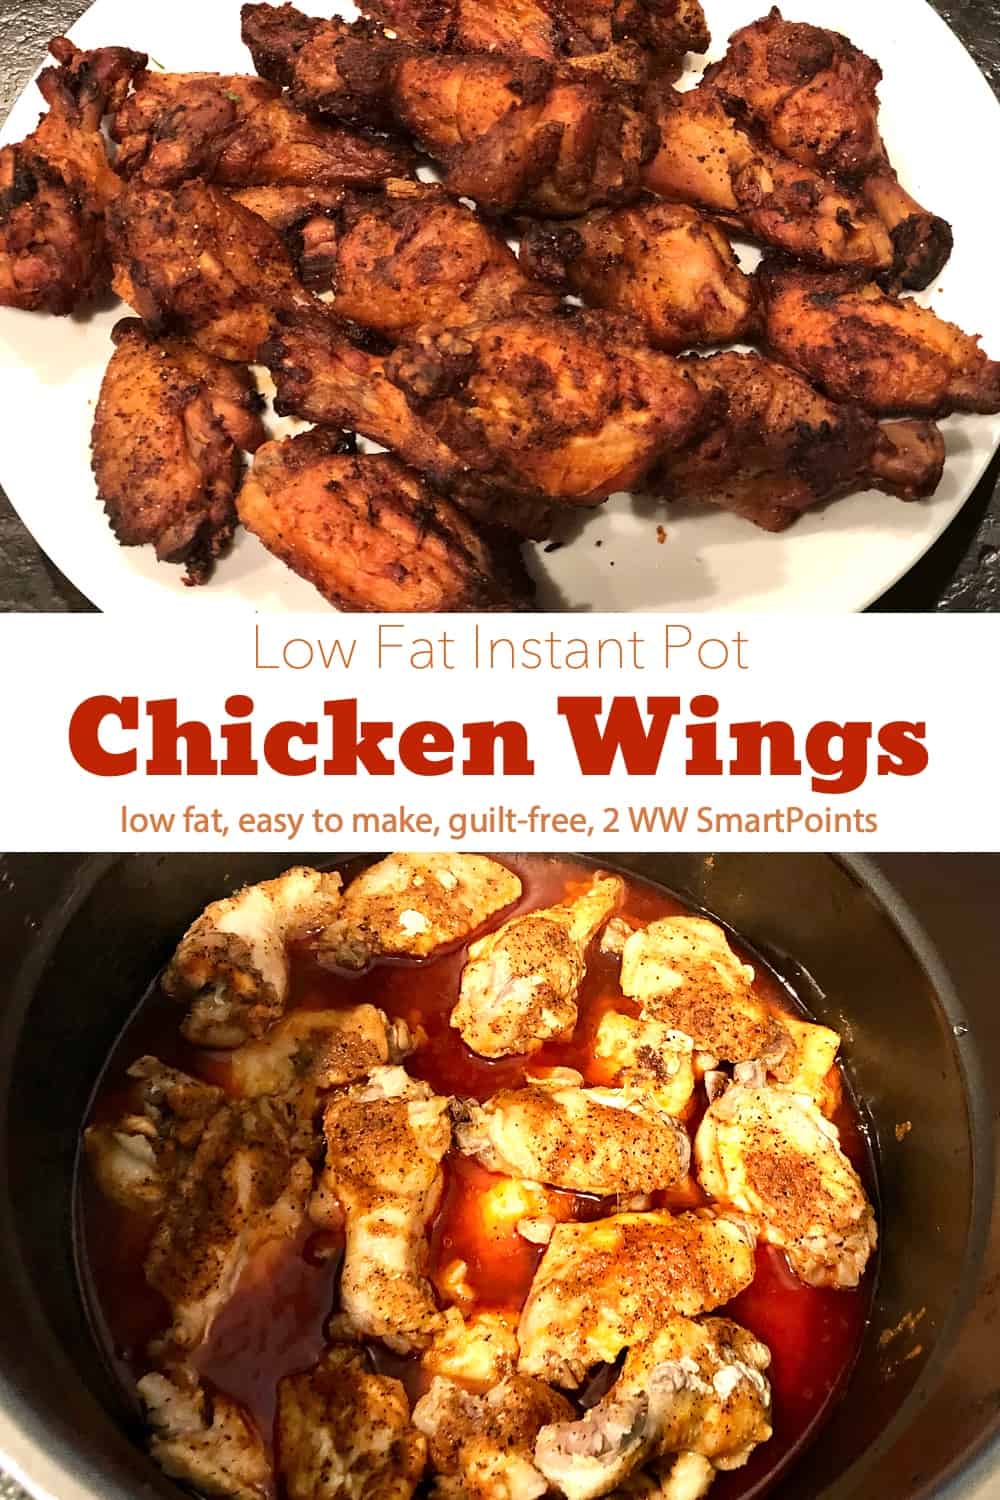 Easy Low Fat Instant Pot Chicken Wings Recipe | Simple Nourished Living